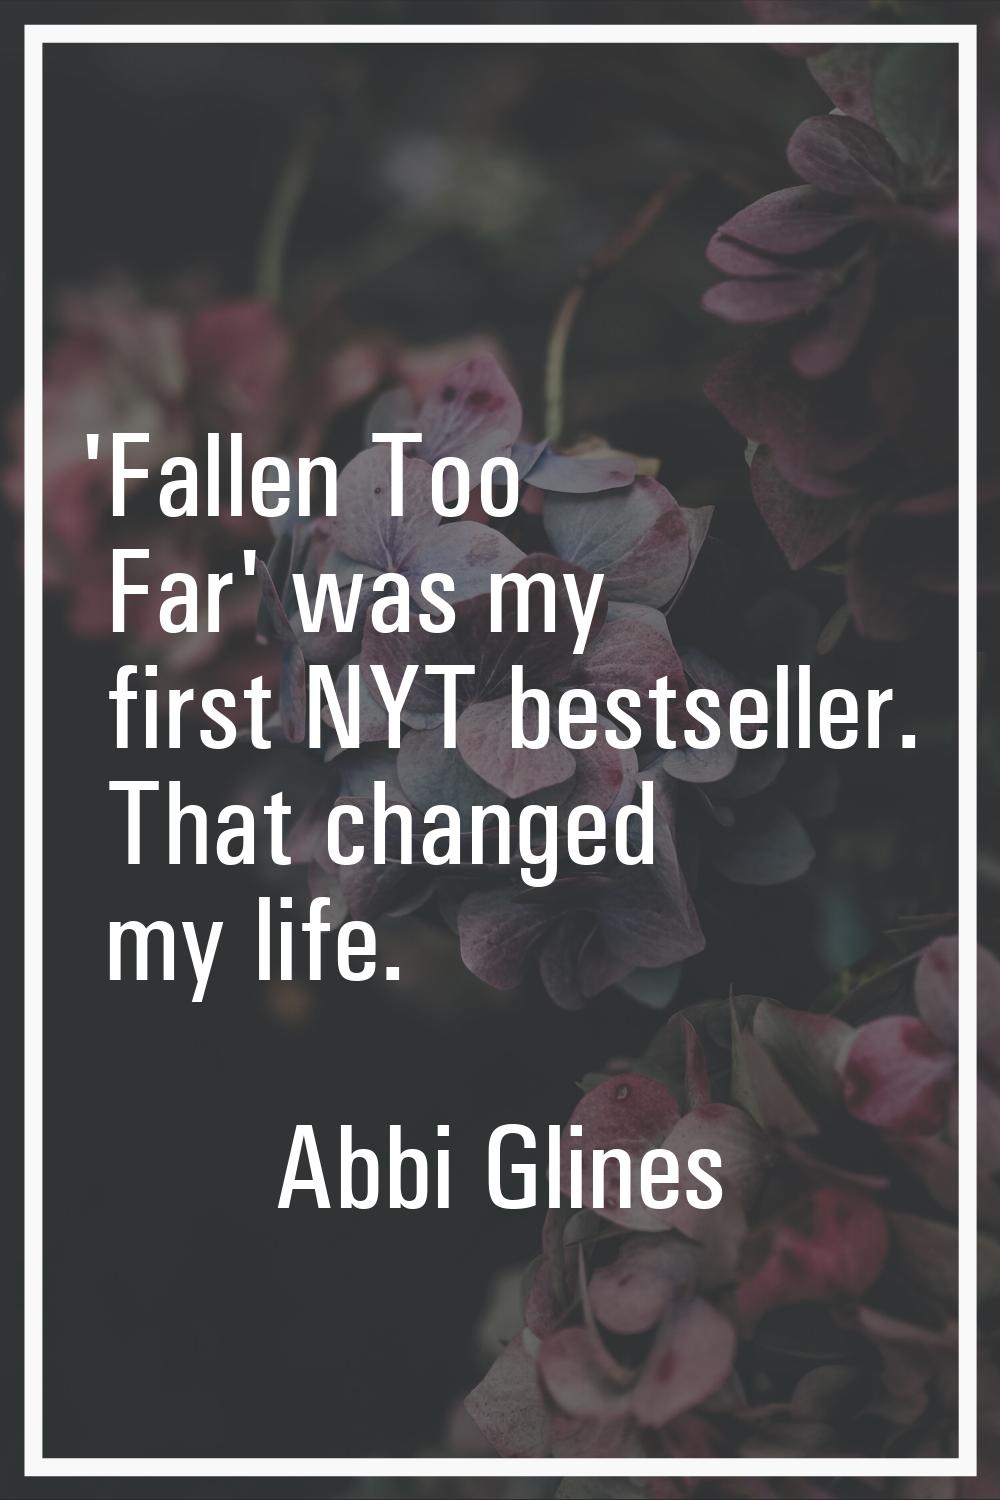 'Fallen Too Far' was my first NYT bestseller. That changed my life.